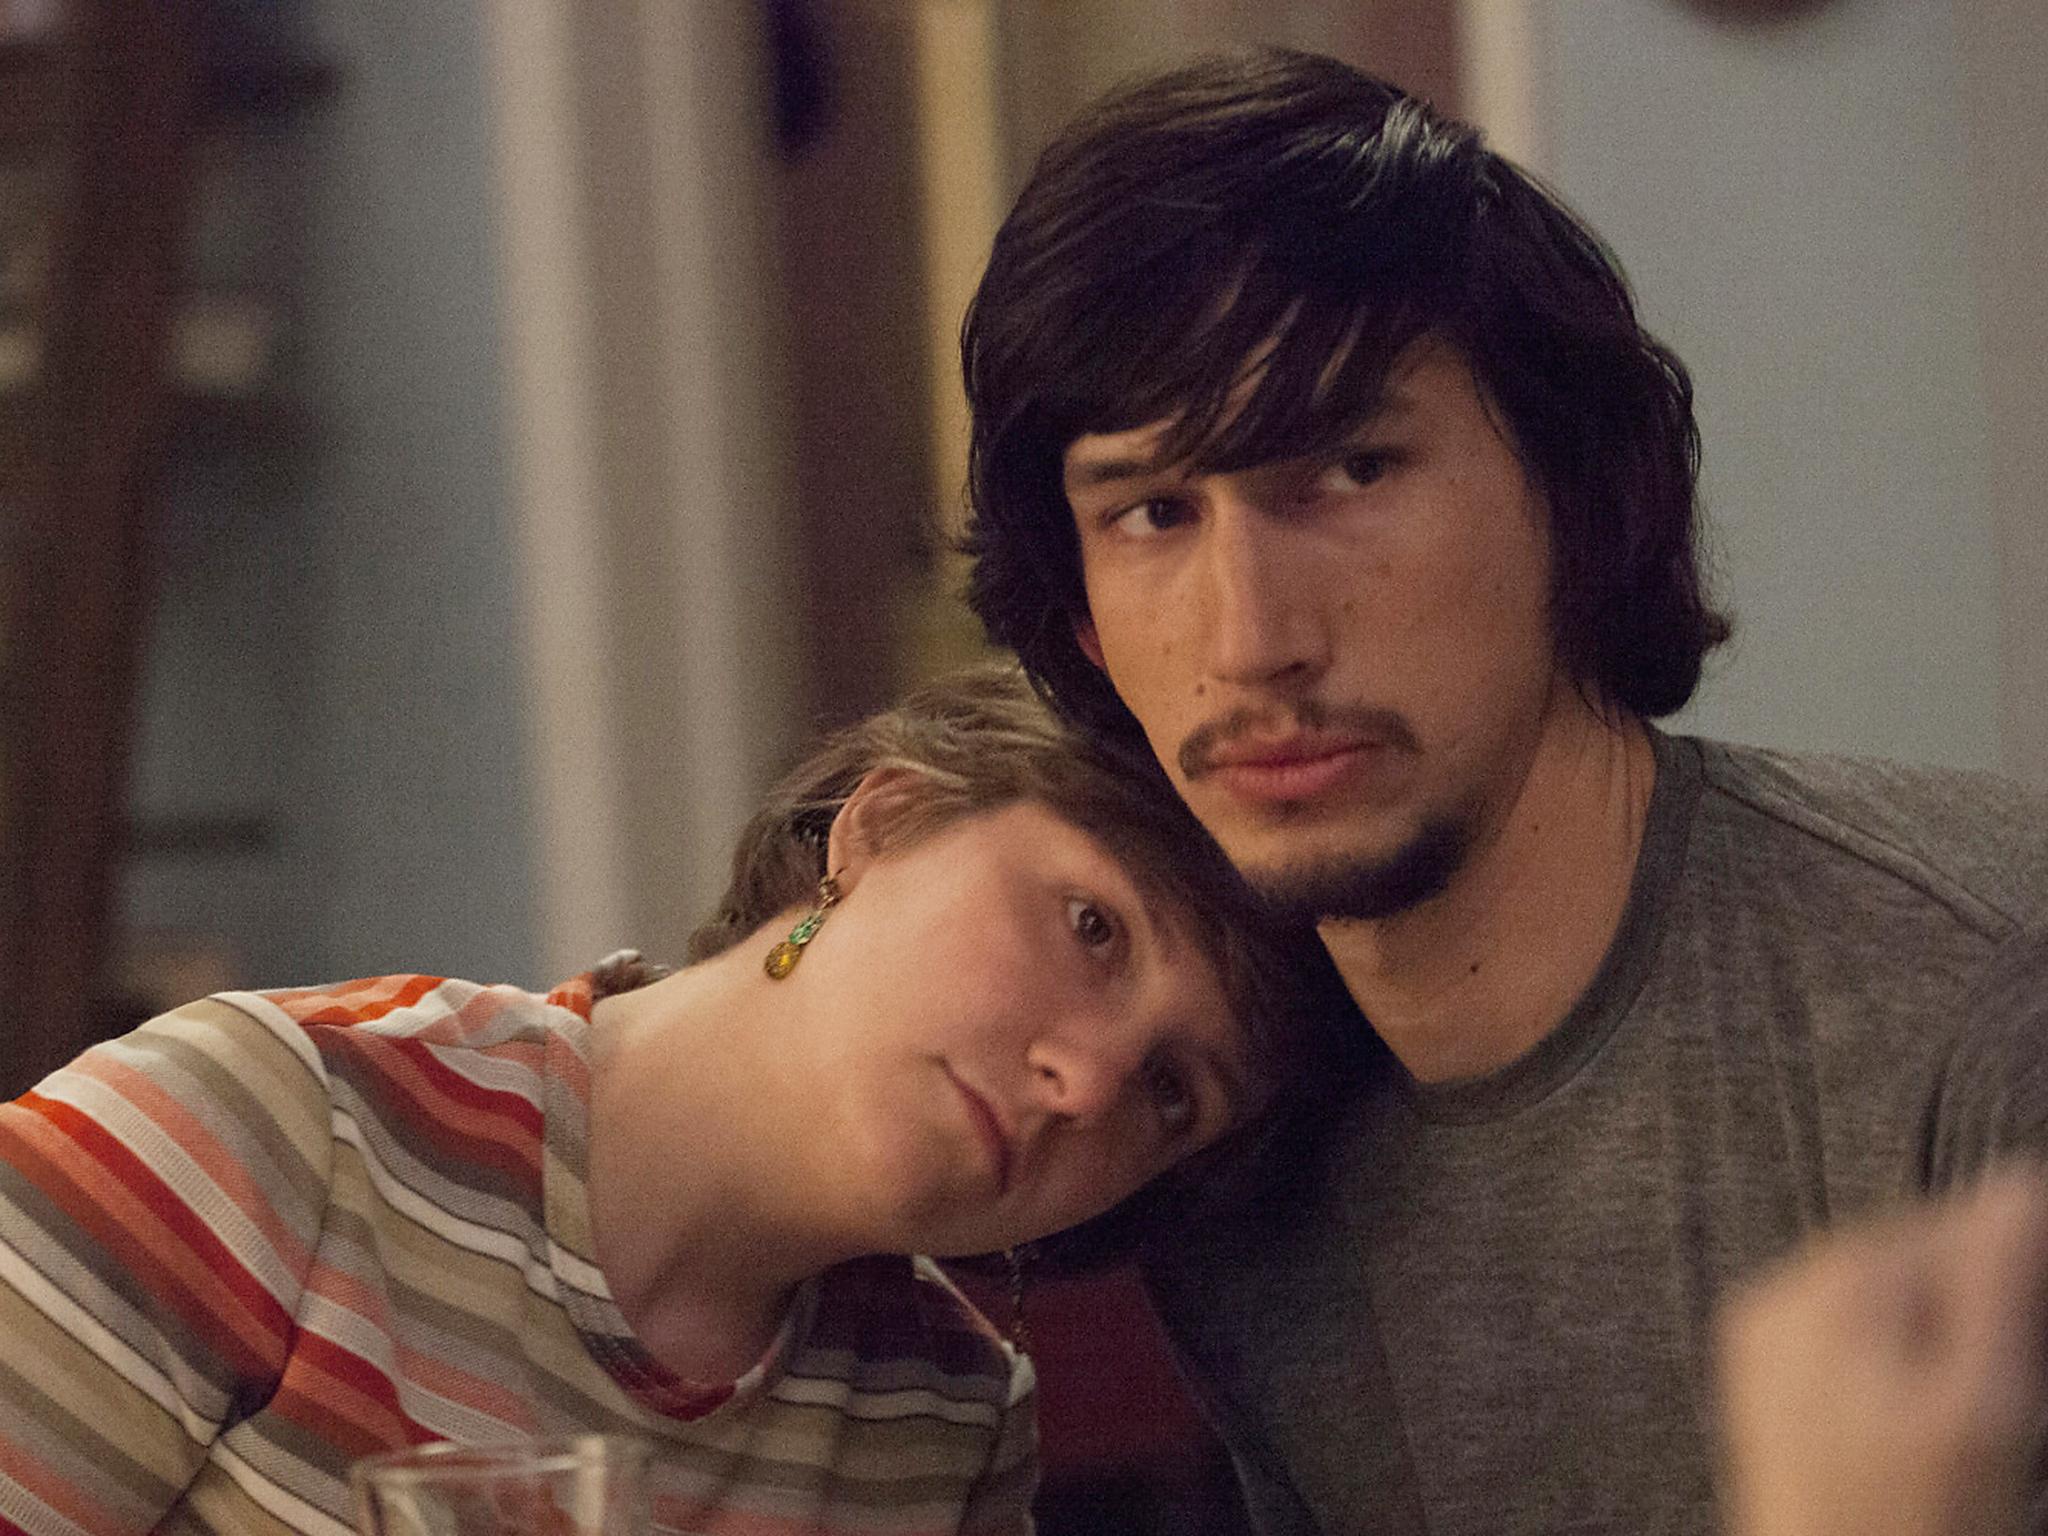 A scene from ‘Girls’ with Adam Driver and Lena Dunham